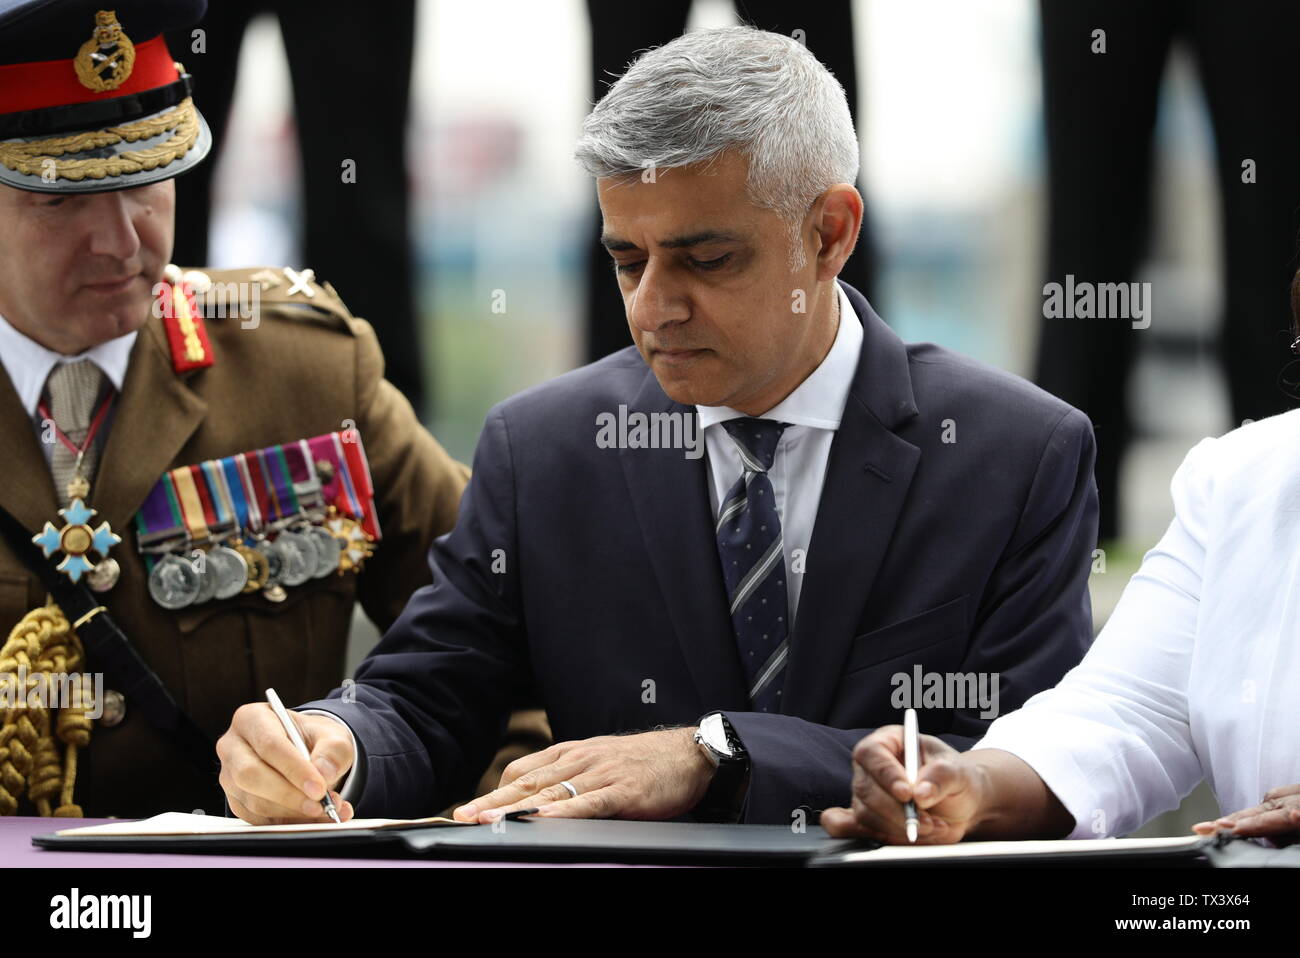 Mayor of London Sadiq Khan signs the Armed Forces Covenant during a flag-raising ceremony at City Hall, London, to show support for the men and women who make up the Armed Forces community ahead of Armed Forces Day. Stock Photo